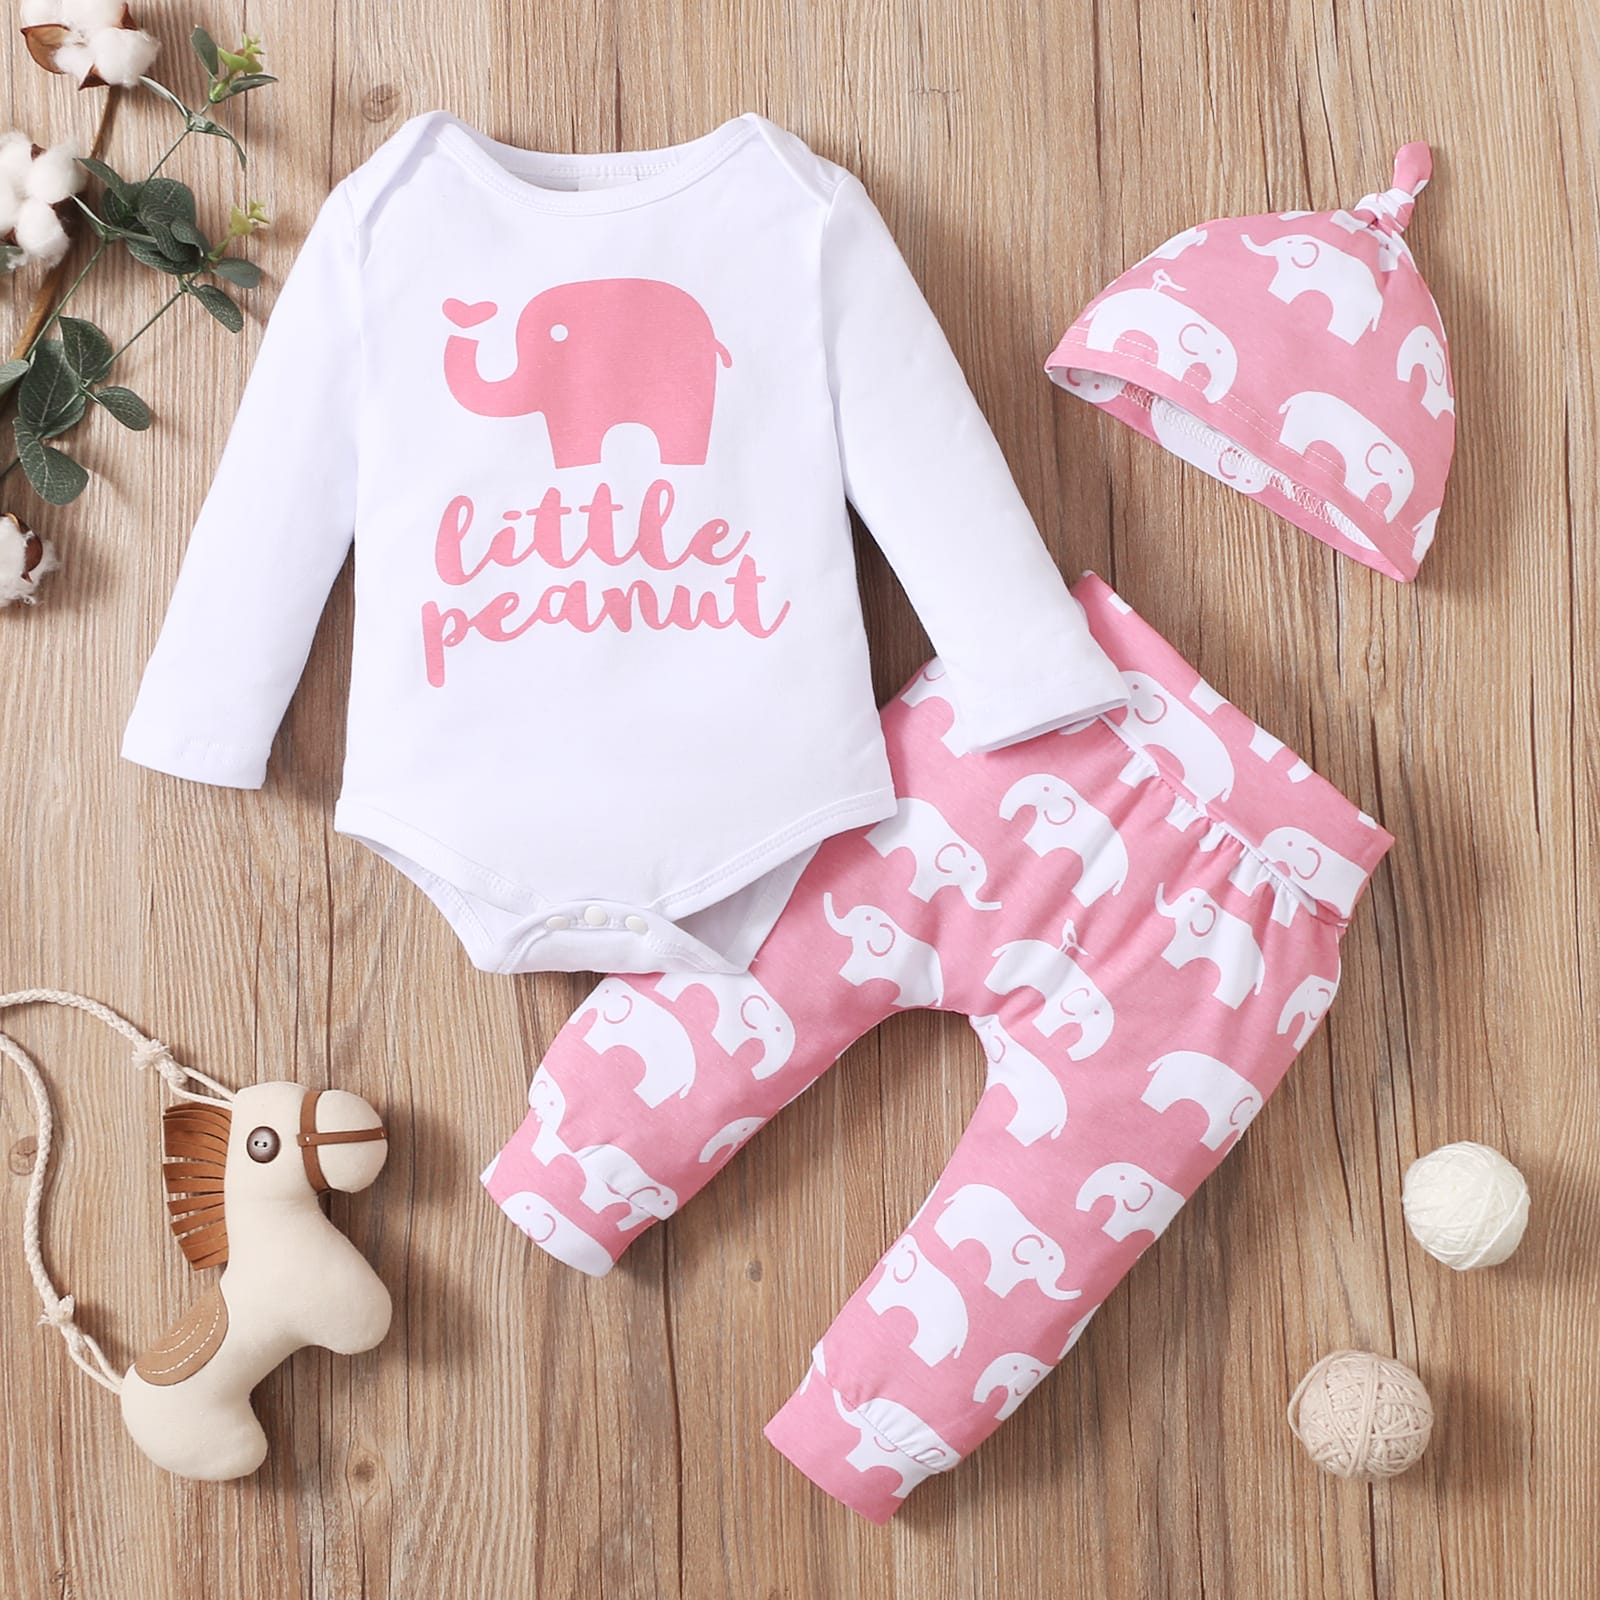 PatPat 3-piece Baby Boy Girl Cotton Long-sleeve Letter and Elephant Print  Bodysuit and Pants with Hat Set Sets Clothes 6-9M 20136030 price in Doha  Qatar